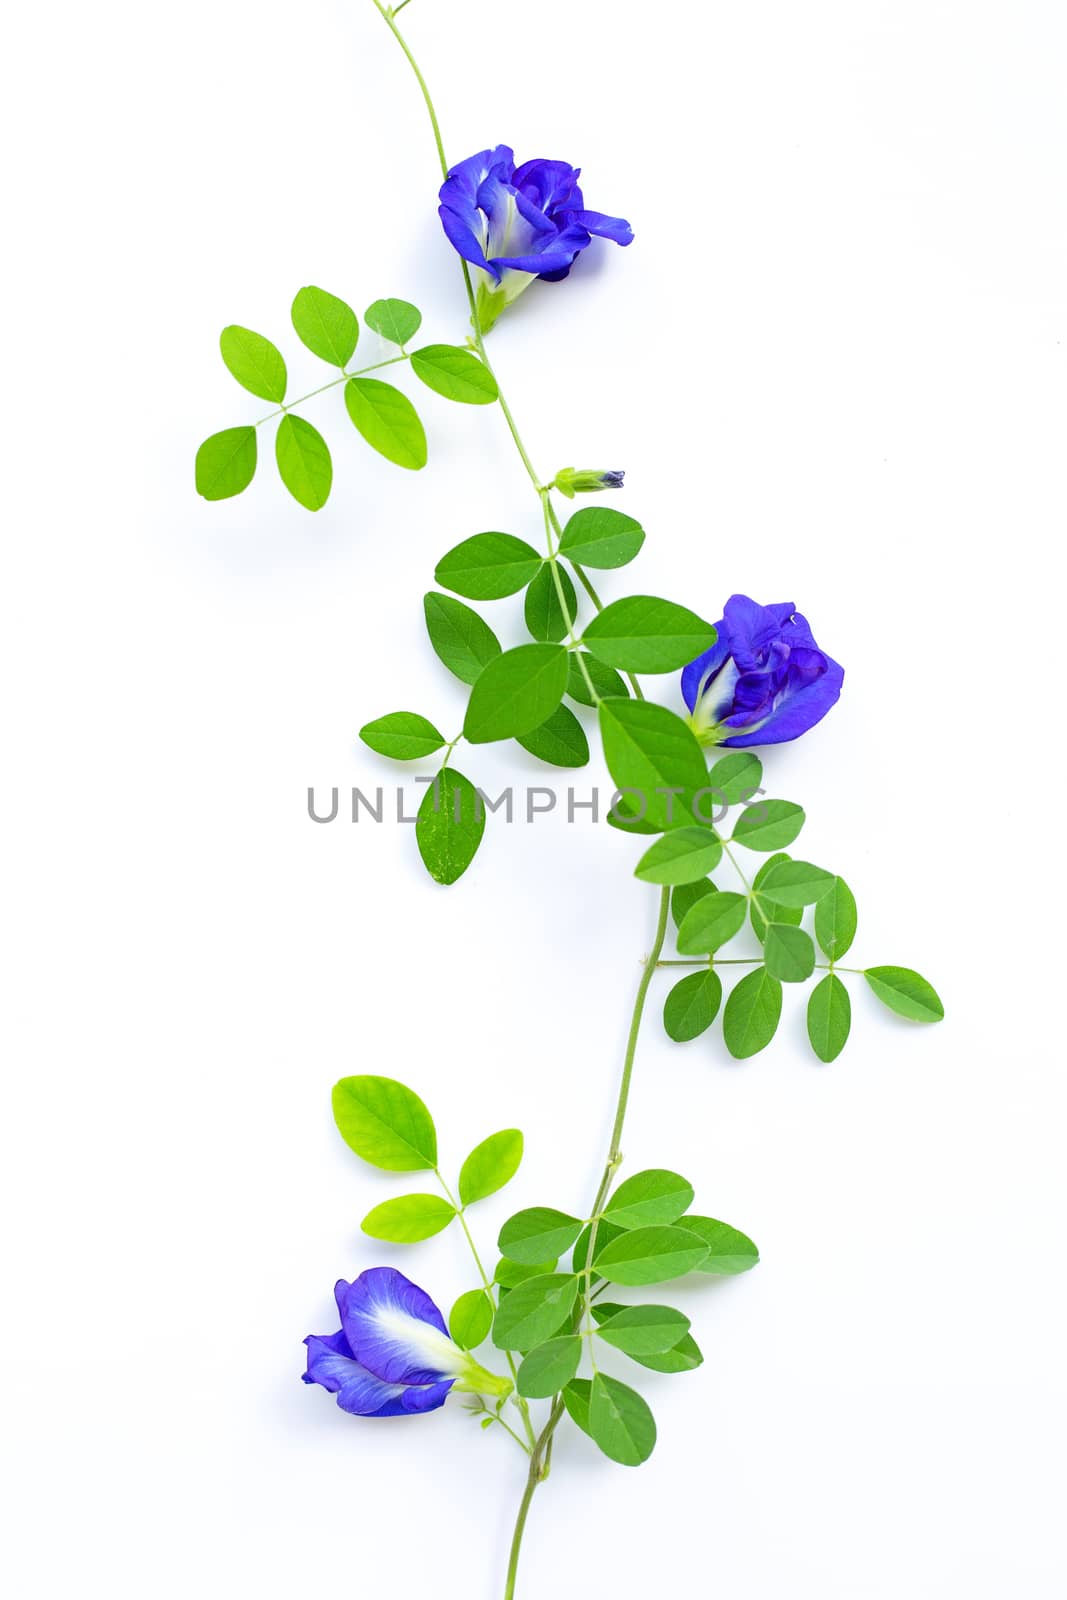 Butterfly pea flower with leaves on white background. by Bowonpat